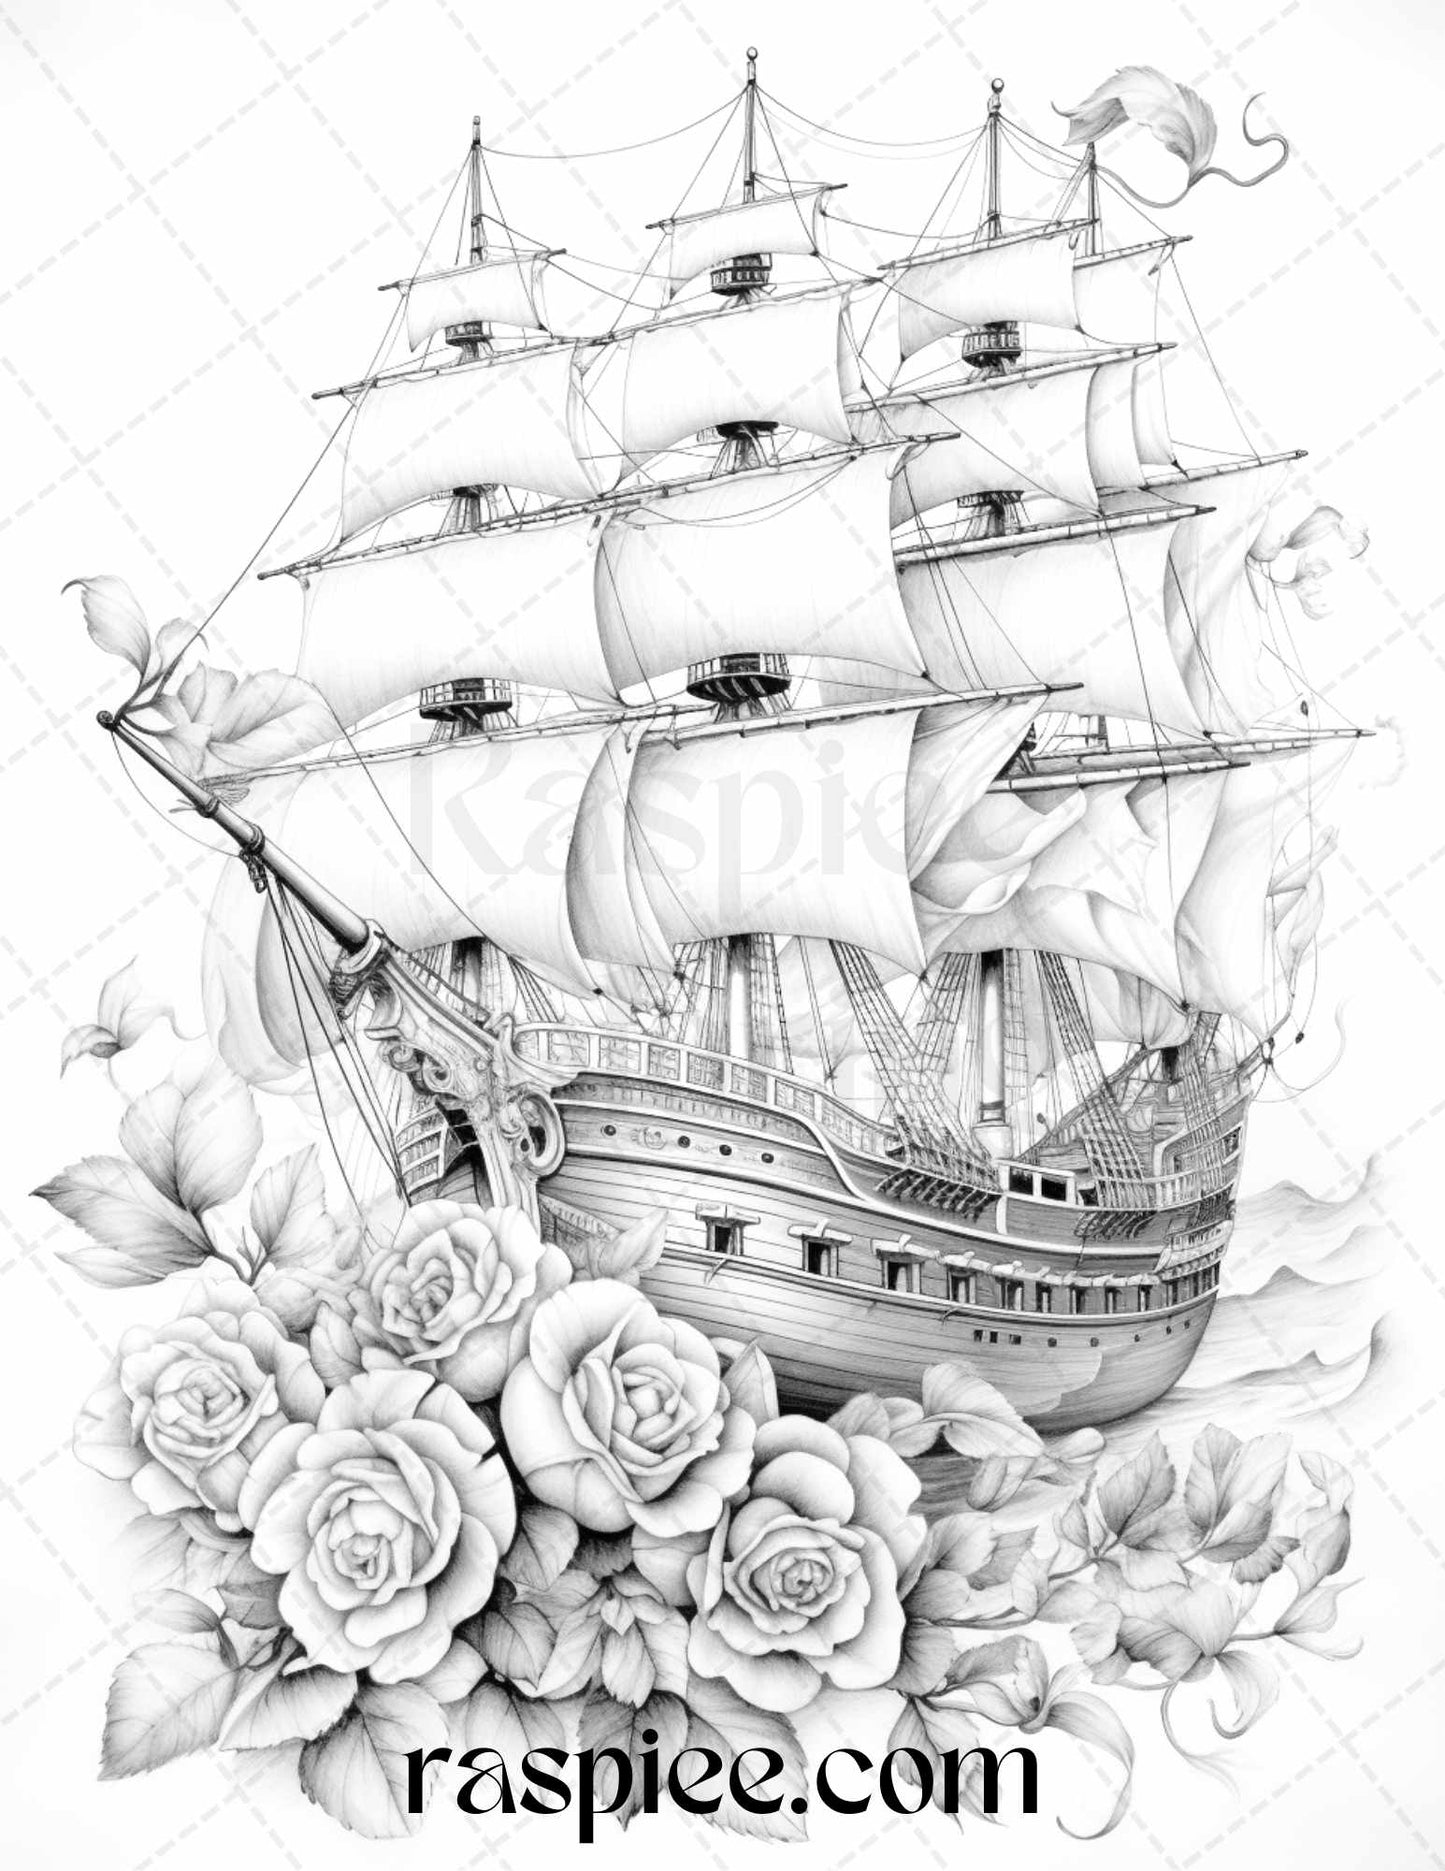 Flower Ships Coloring Page for Adults, Printable Grayscale Coloring Sheet, Relaxing Adult Coloring Activity, Stress-Relief Coloring Page, Instant Download Coloring Printable, DIY Adult Coloring Book Page, Creative Coloring for Relaxation